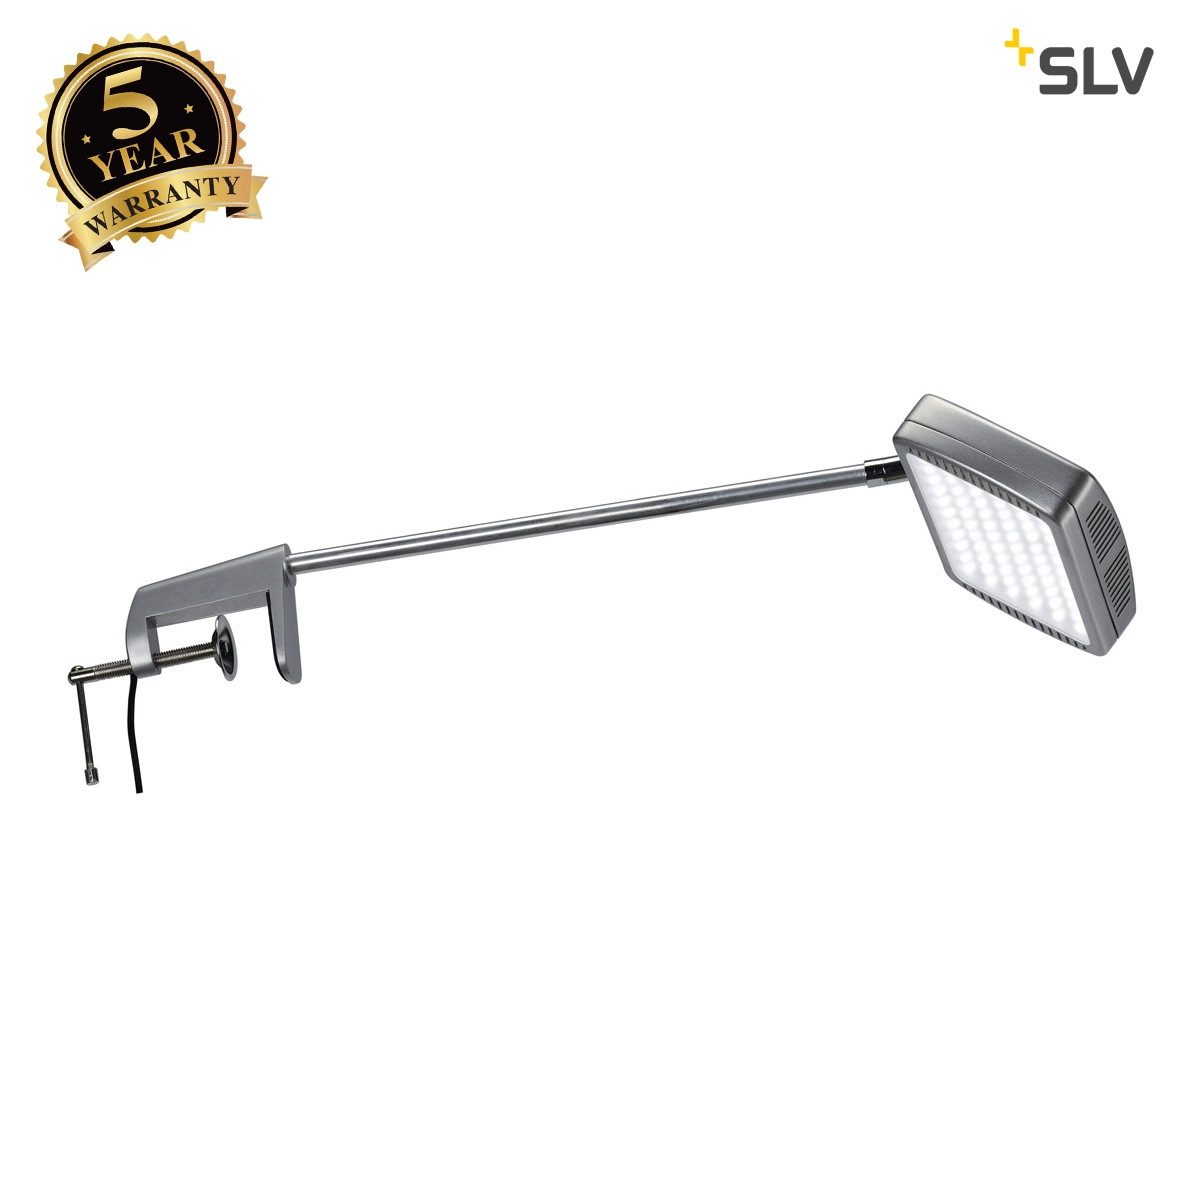 SLV LED DISPLAY, silver-grey, SMD LED 16W, 4000K, incl. power supply and mains plug 170401